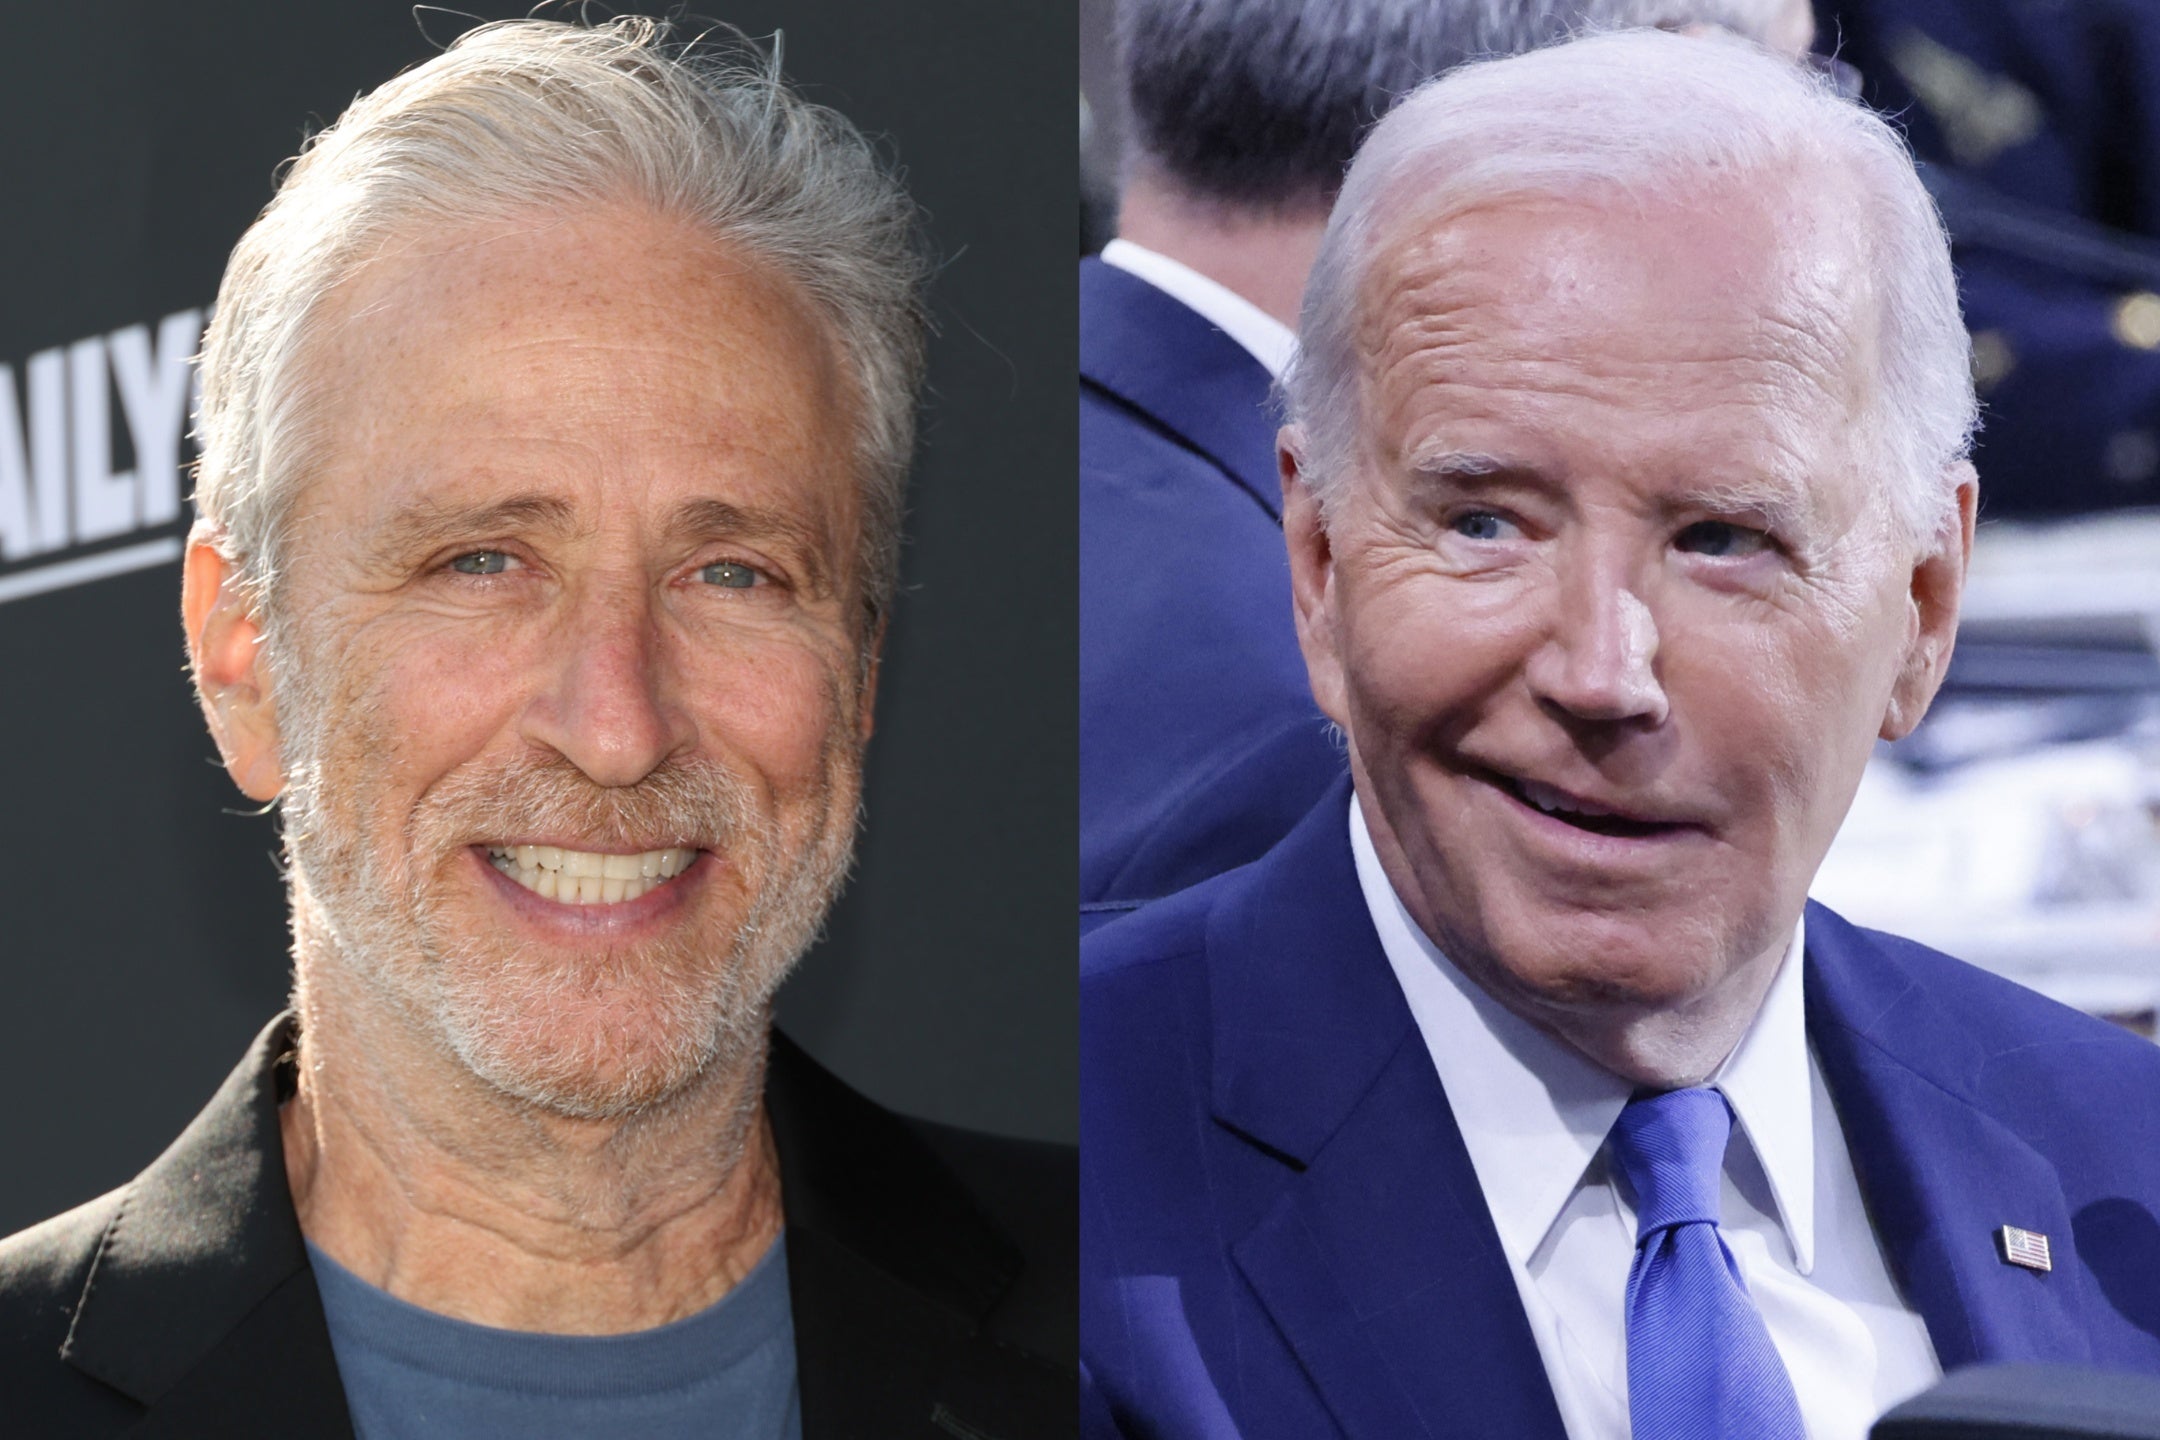 Jon Stewart slammed Joe Biden for being ‘Trumpian’ as the president refuses to even consider discussing giving up the Democratic presidential nomination